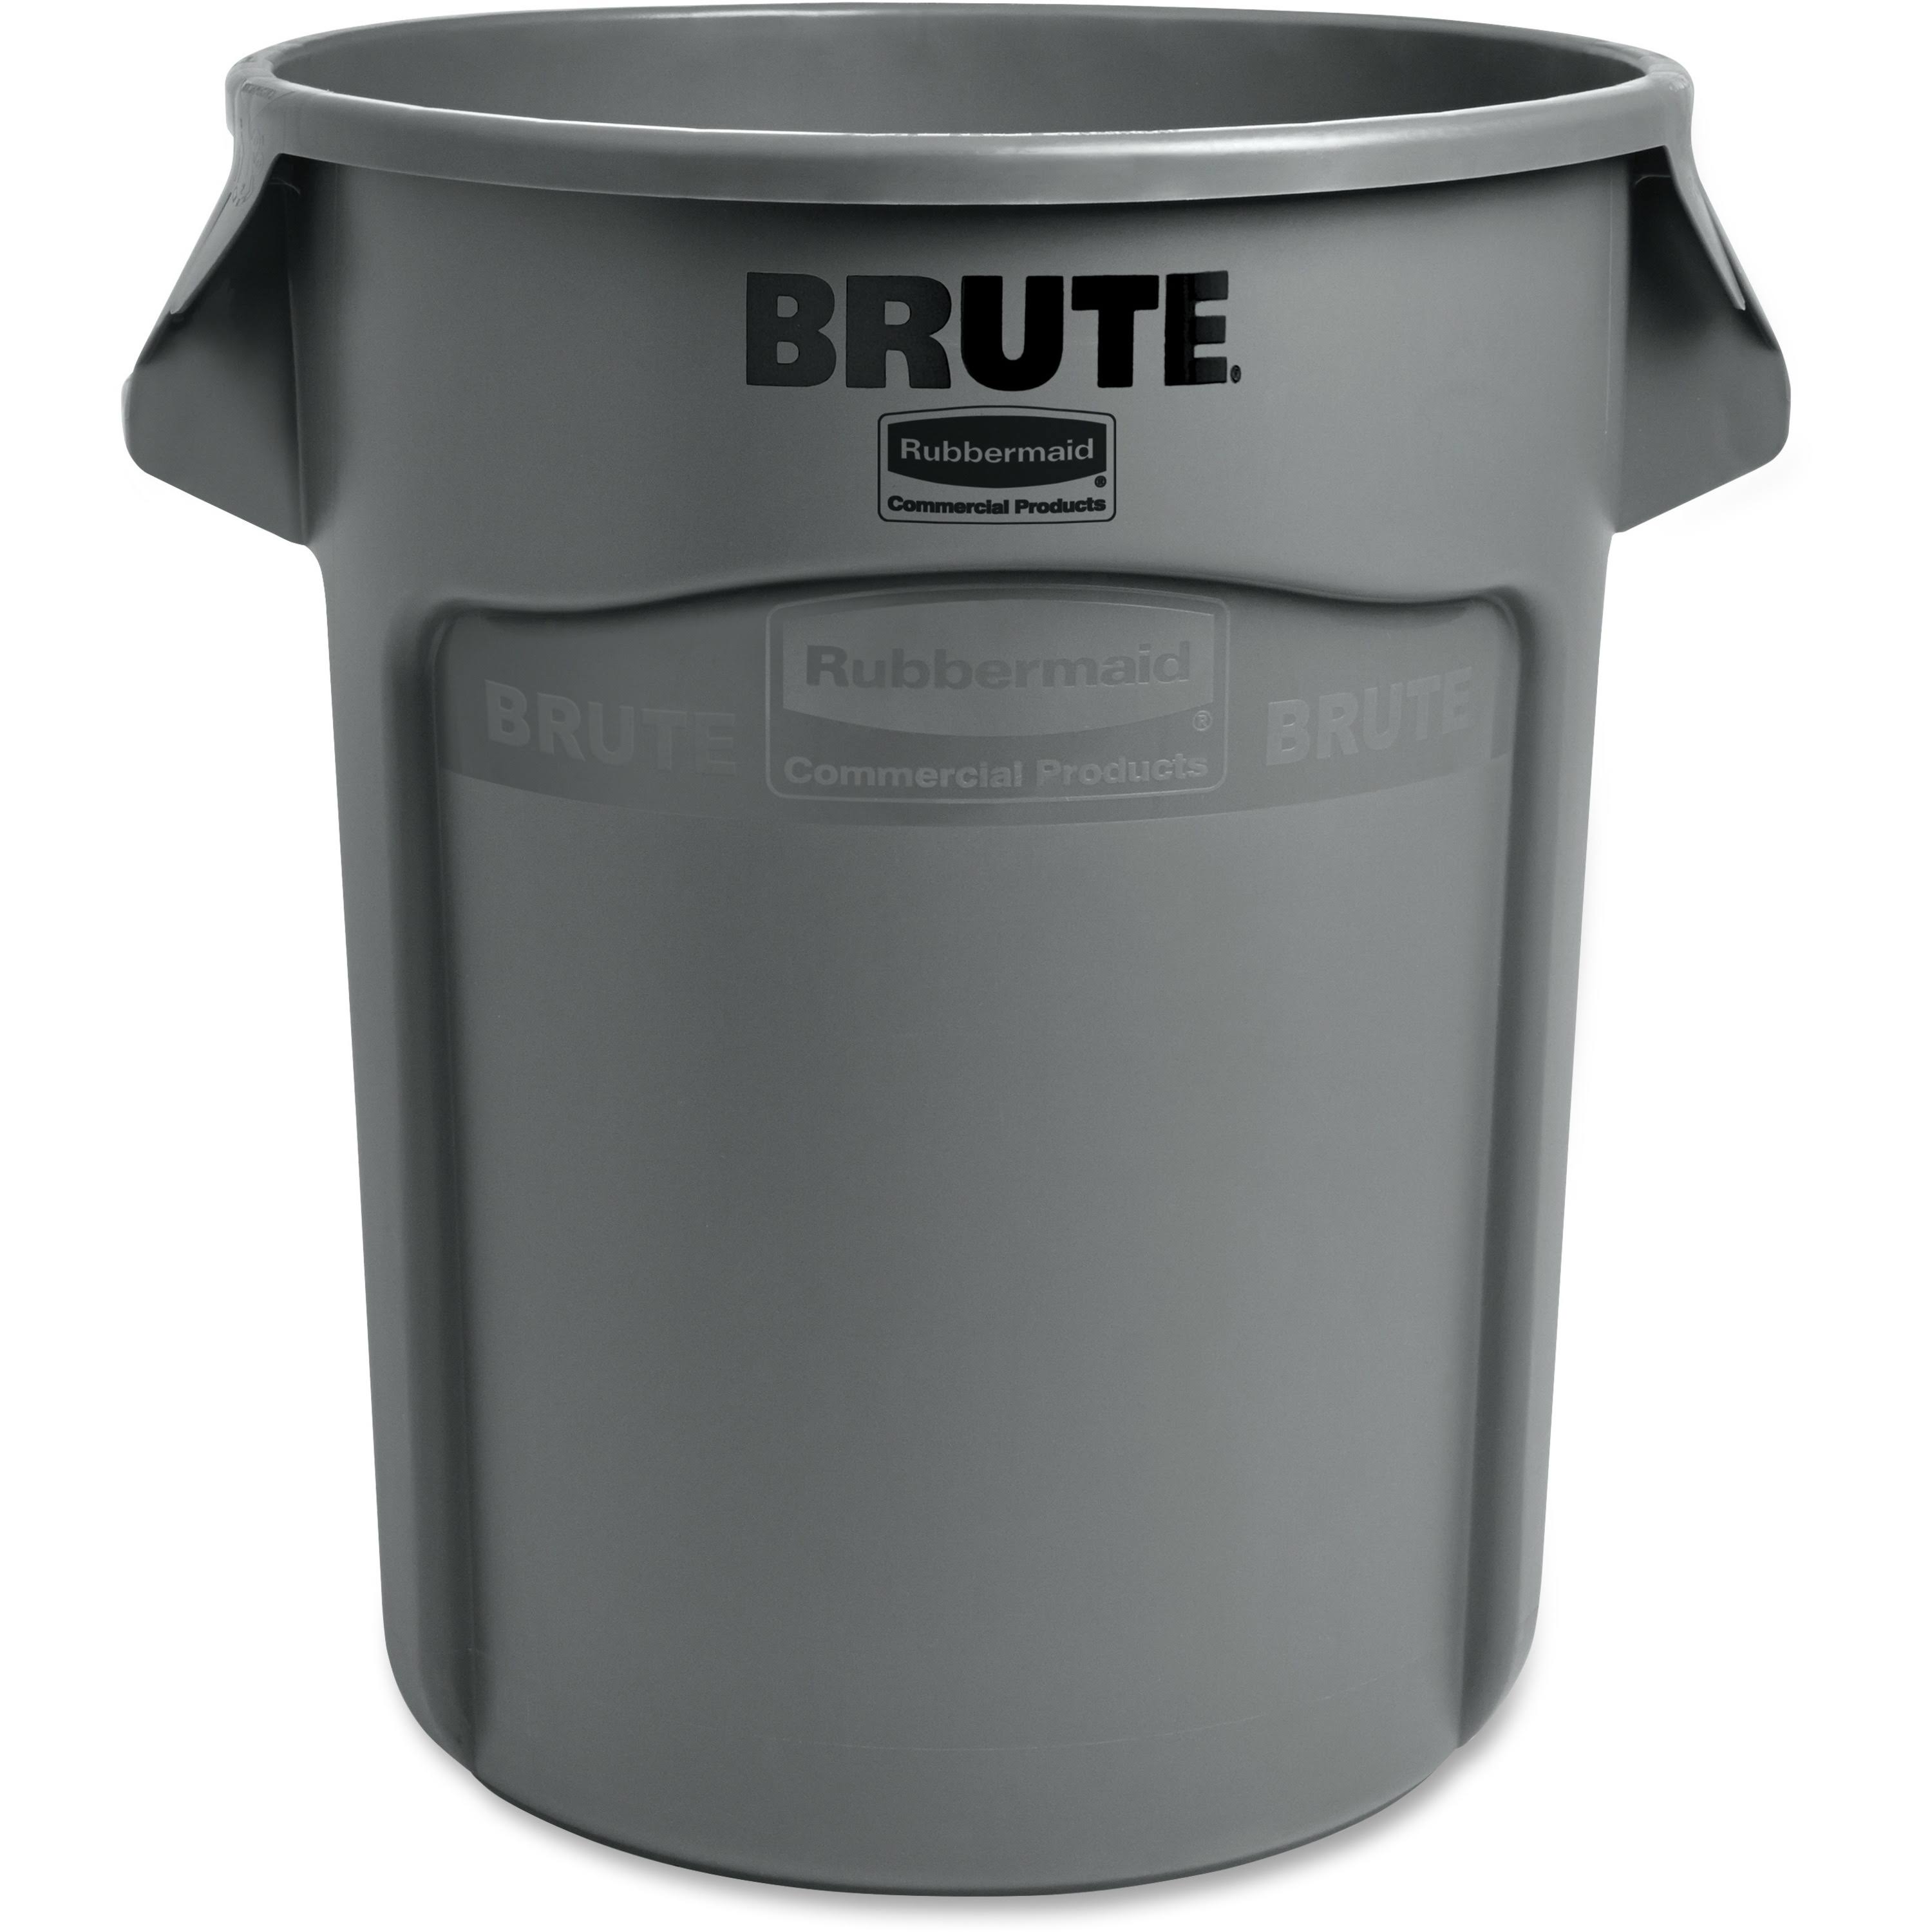 Rubbermaid Brute Container - Gray